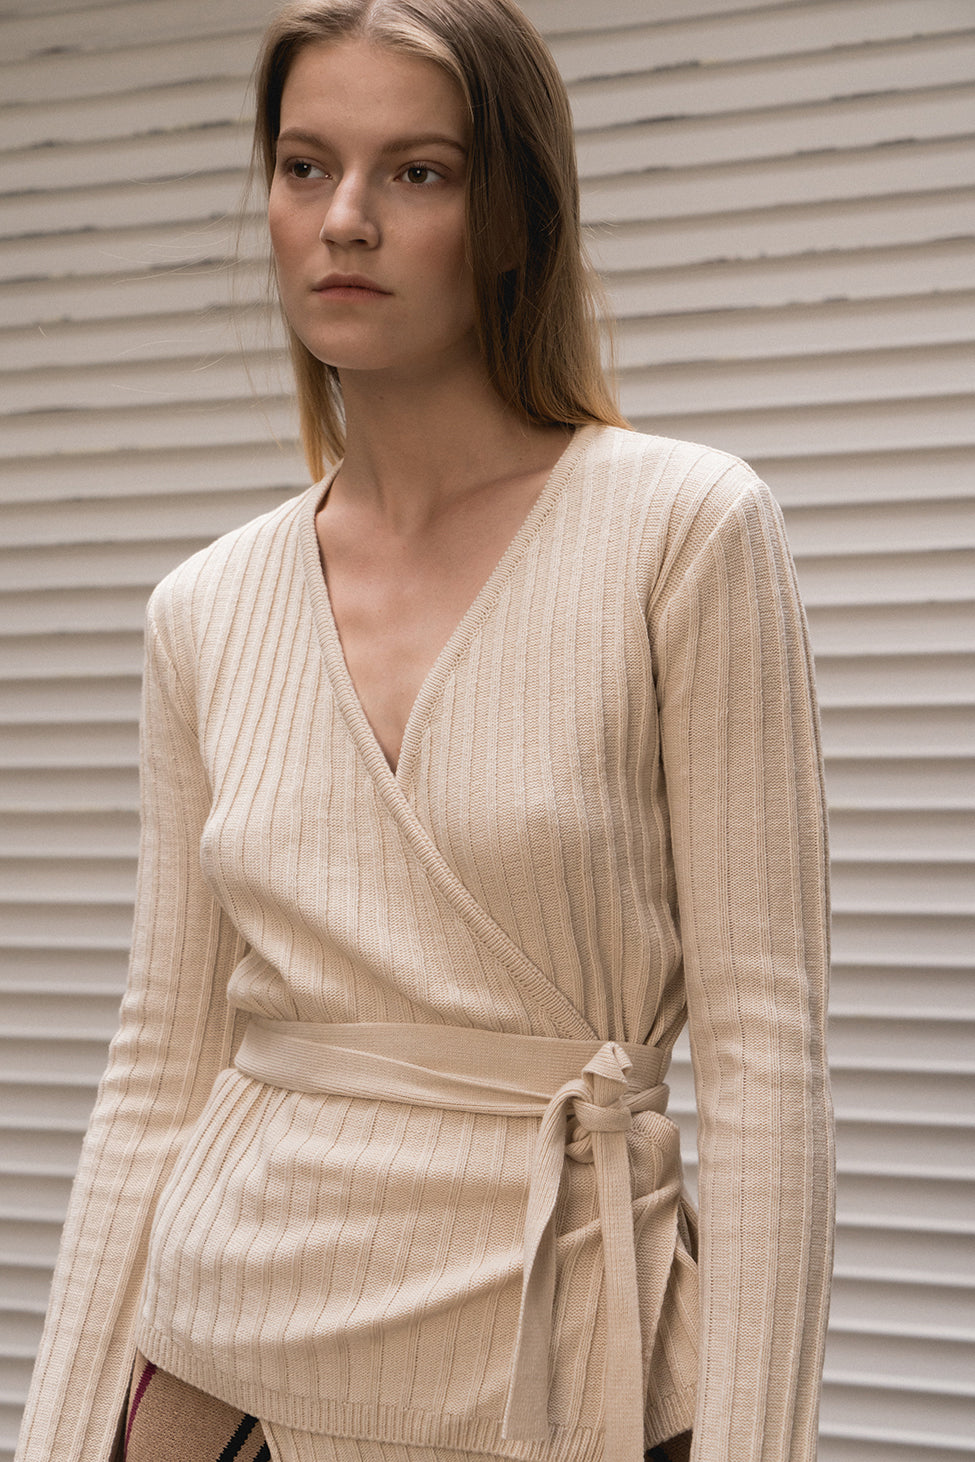 Wrap-around closure with front and tie fastening with deep V-neckline. Ribbed-knit.